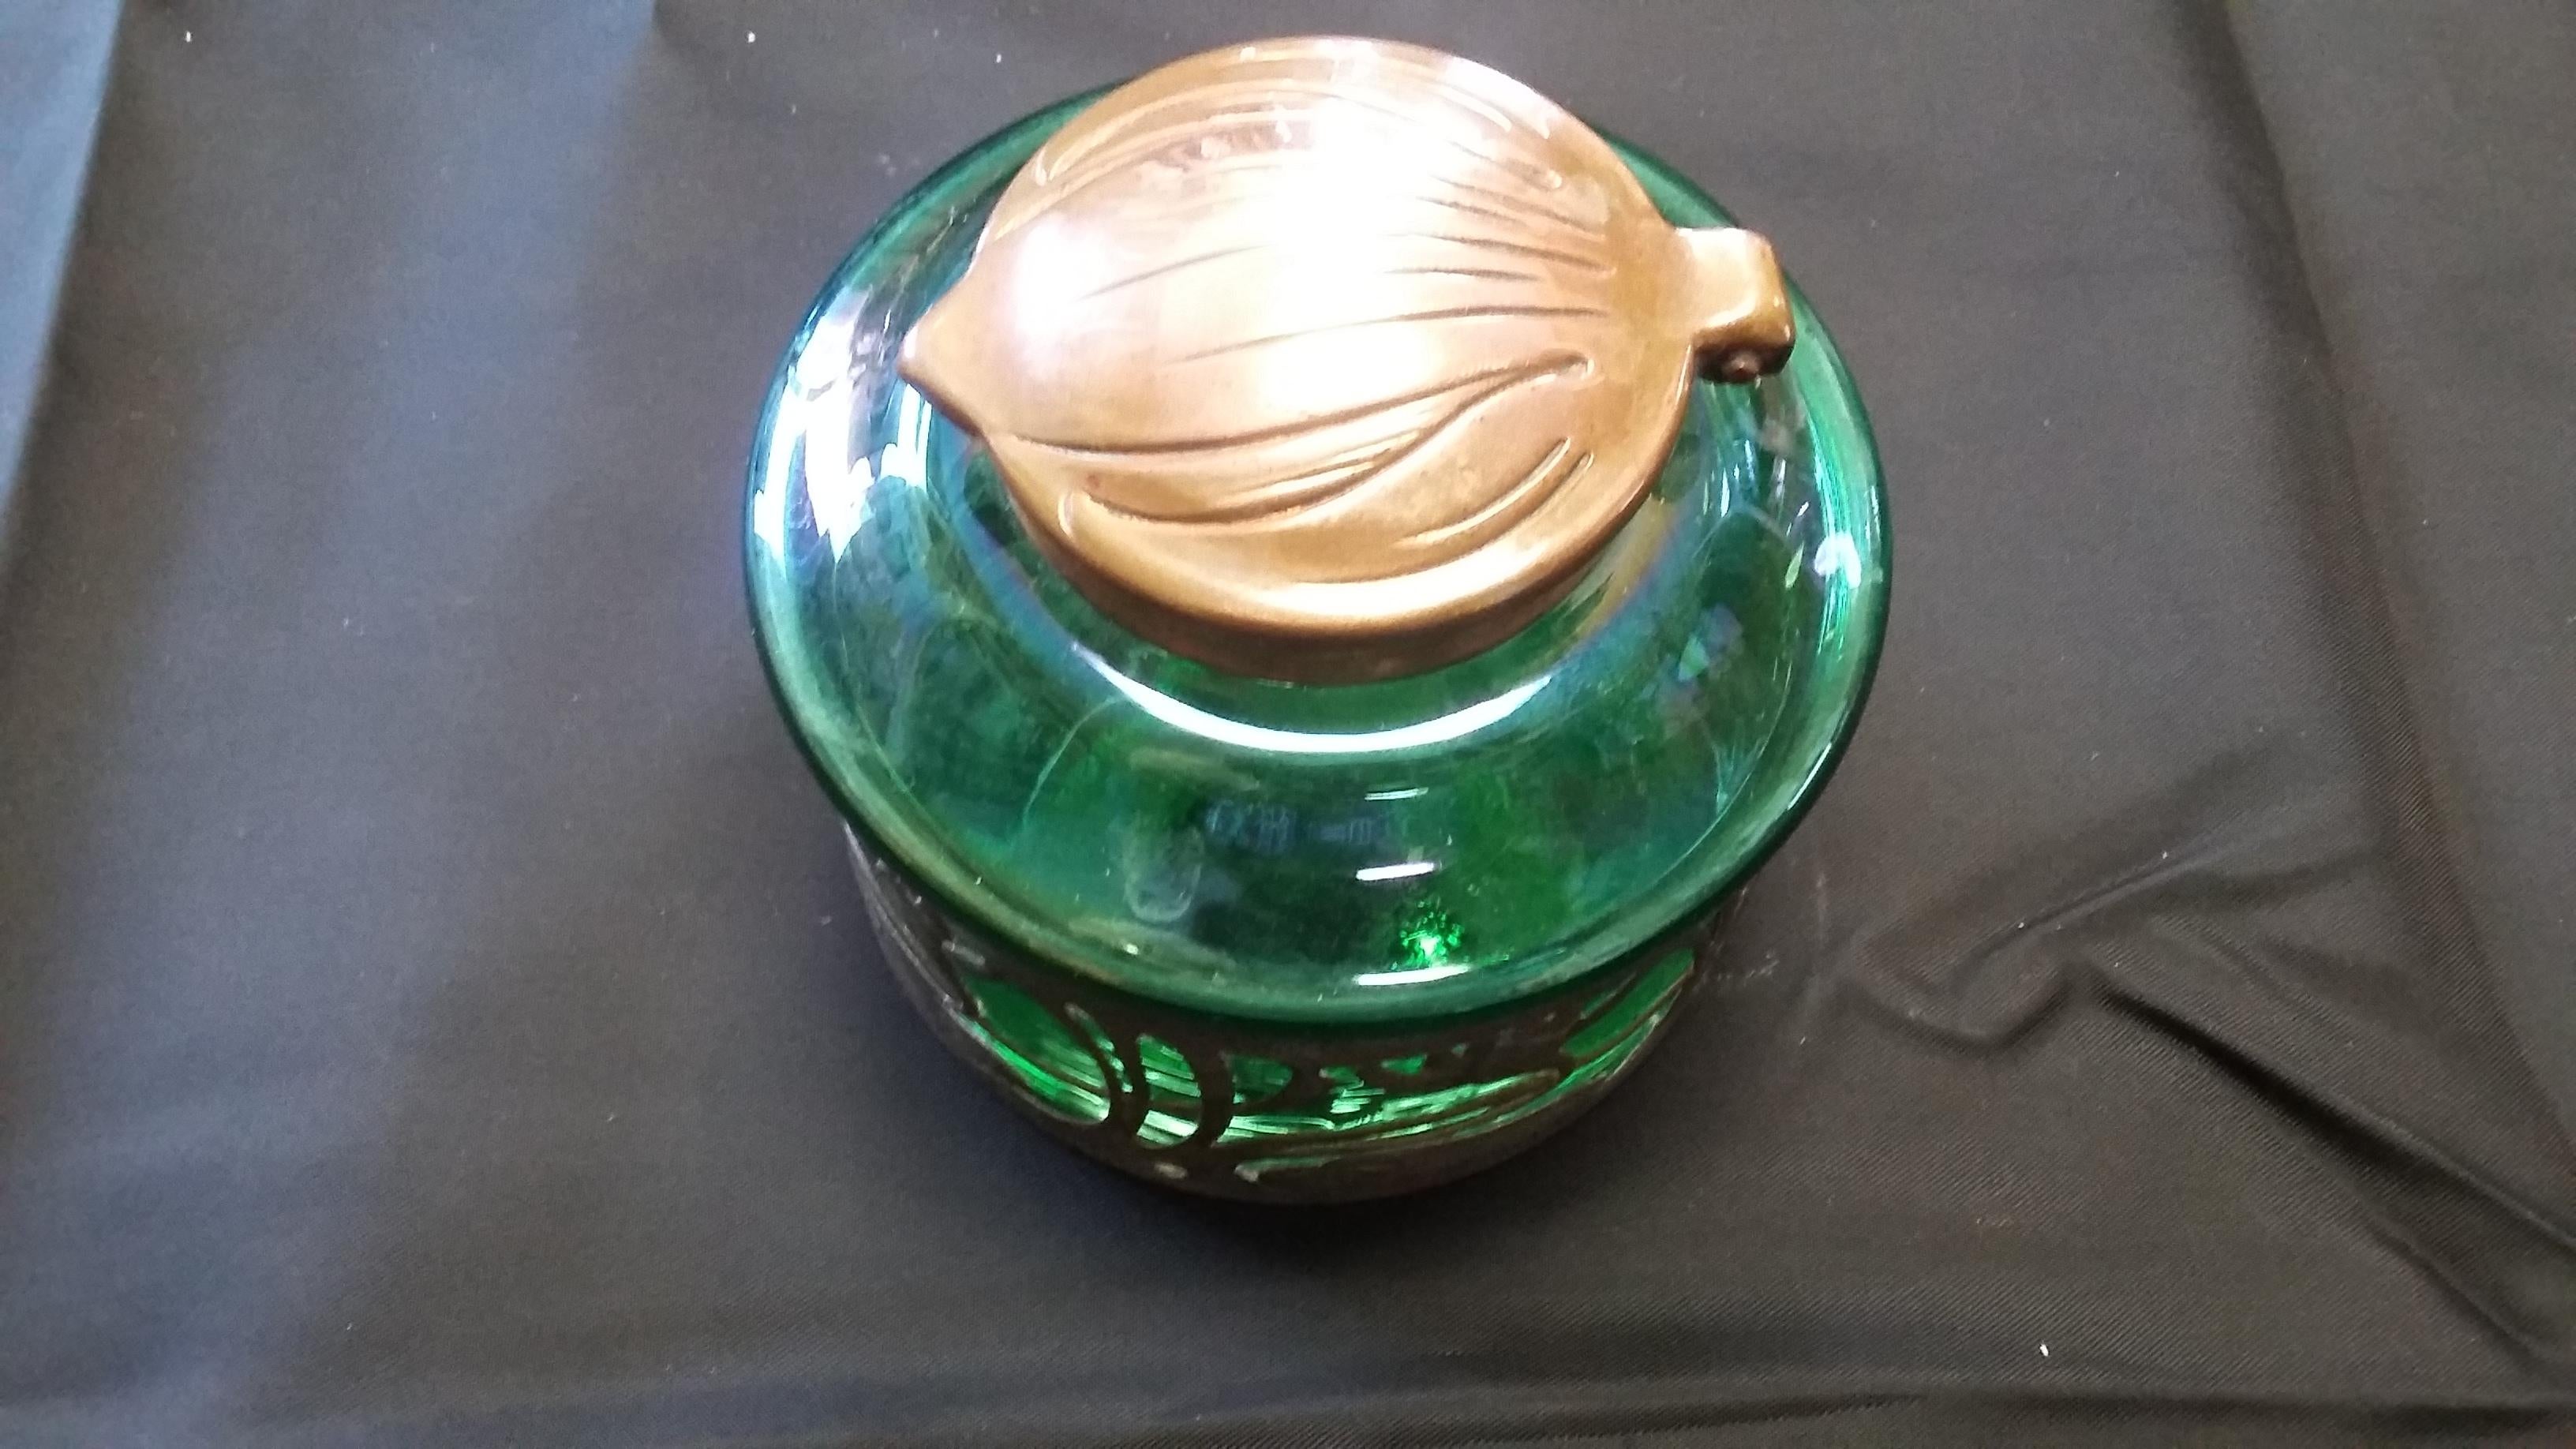 Iridescent green art glass inkwell. Has a copper top with leaf motif. The base has a plated finish with detailed flowers (Art Nouveau) style. 